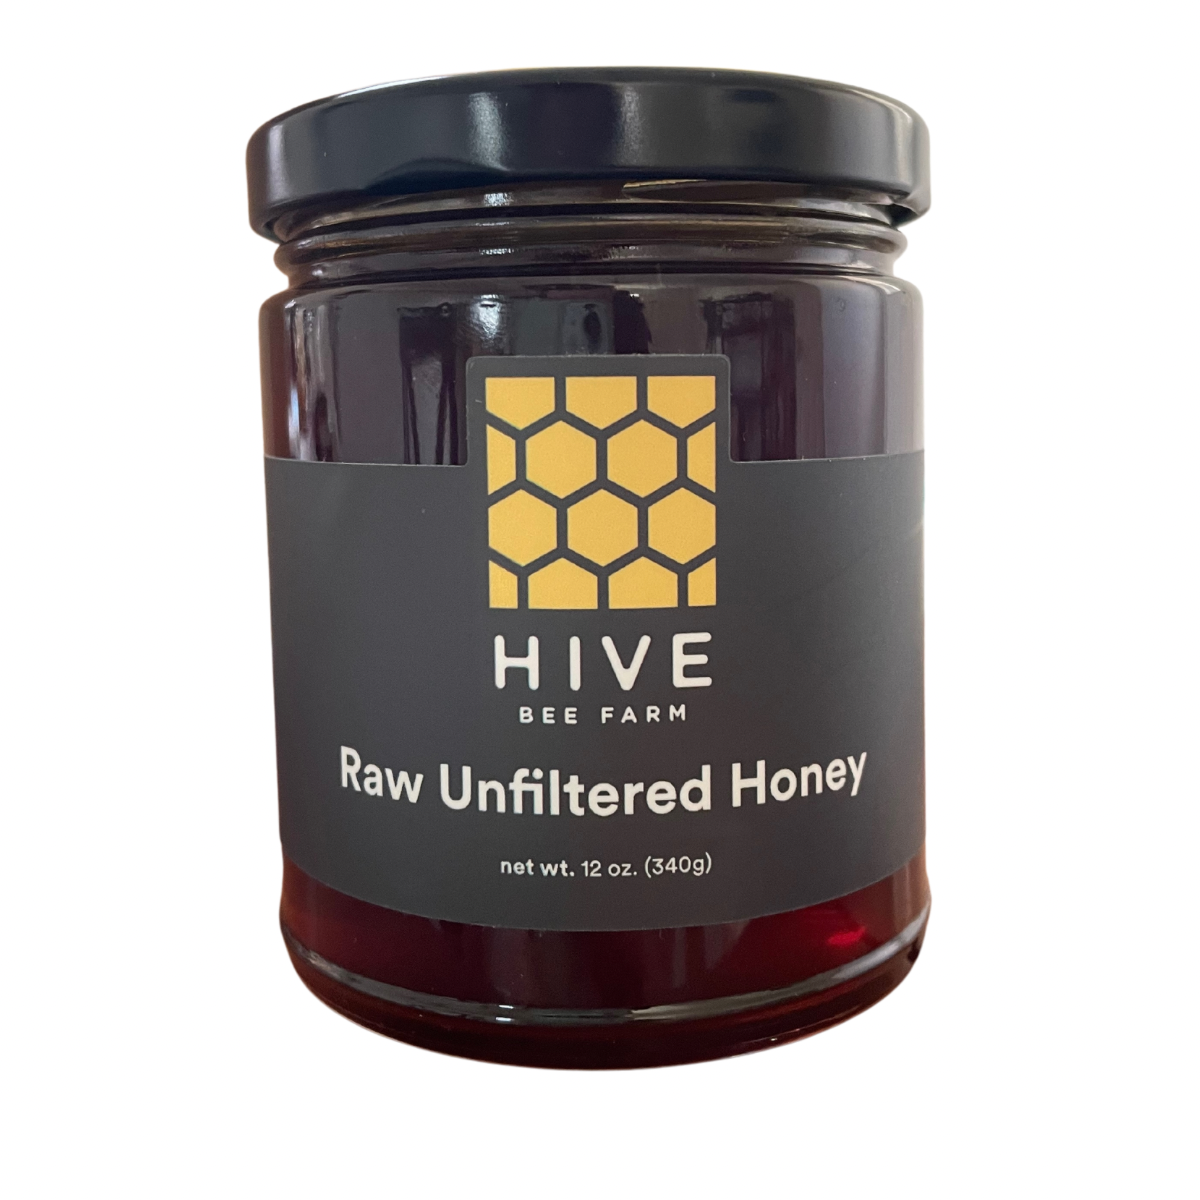 Hive Bee Farm Raw Unfiltered Honey